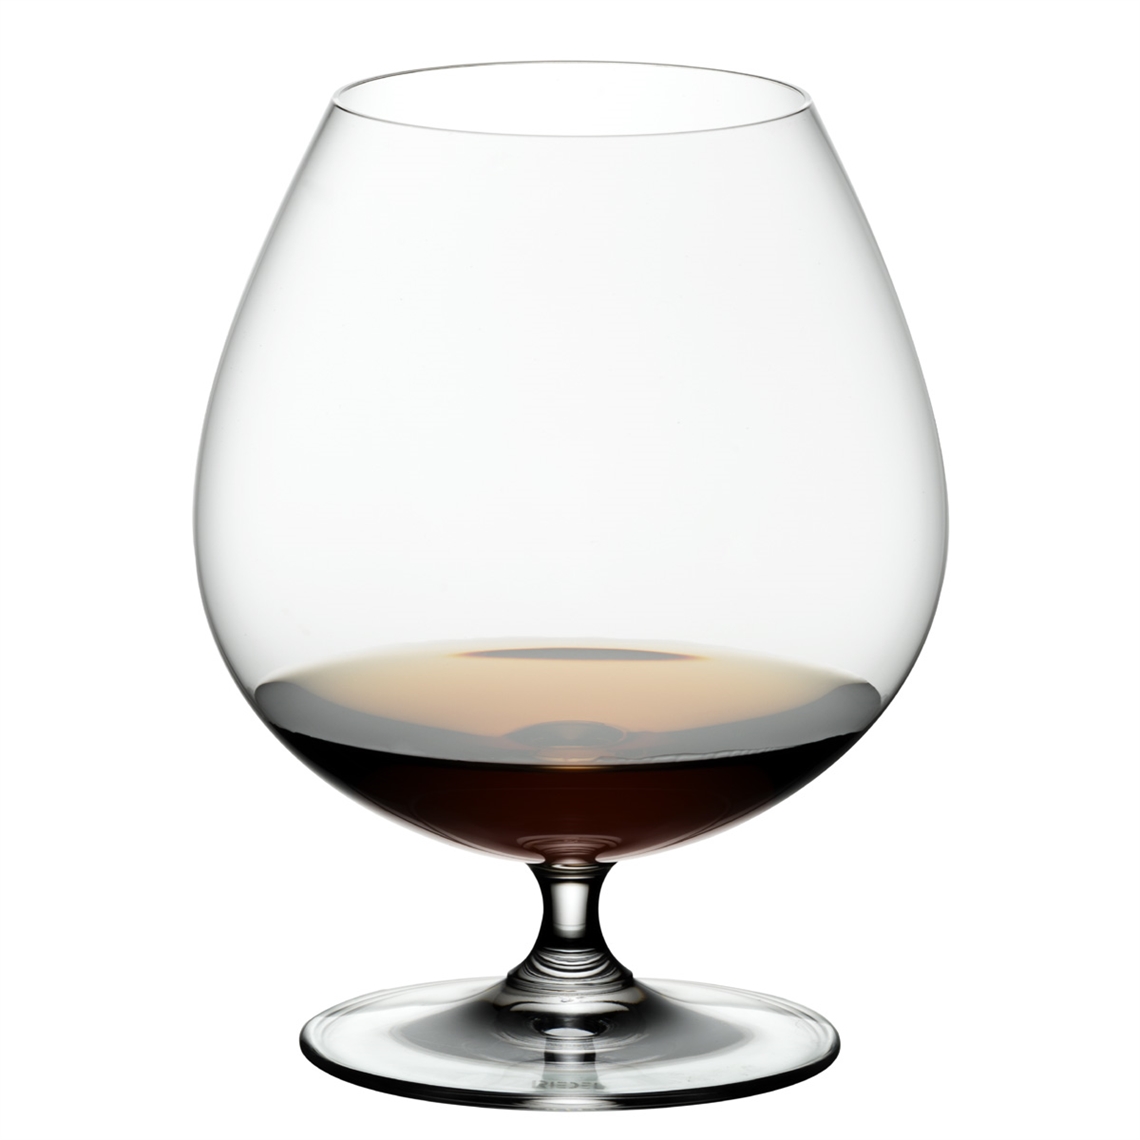 View more wine glasses from our Spirit Glasses range